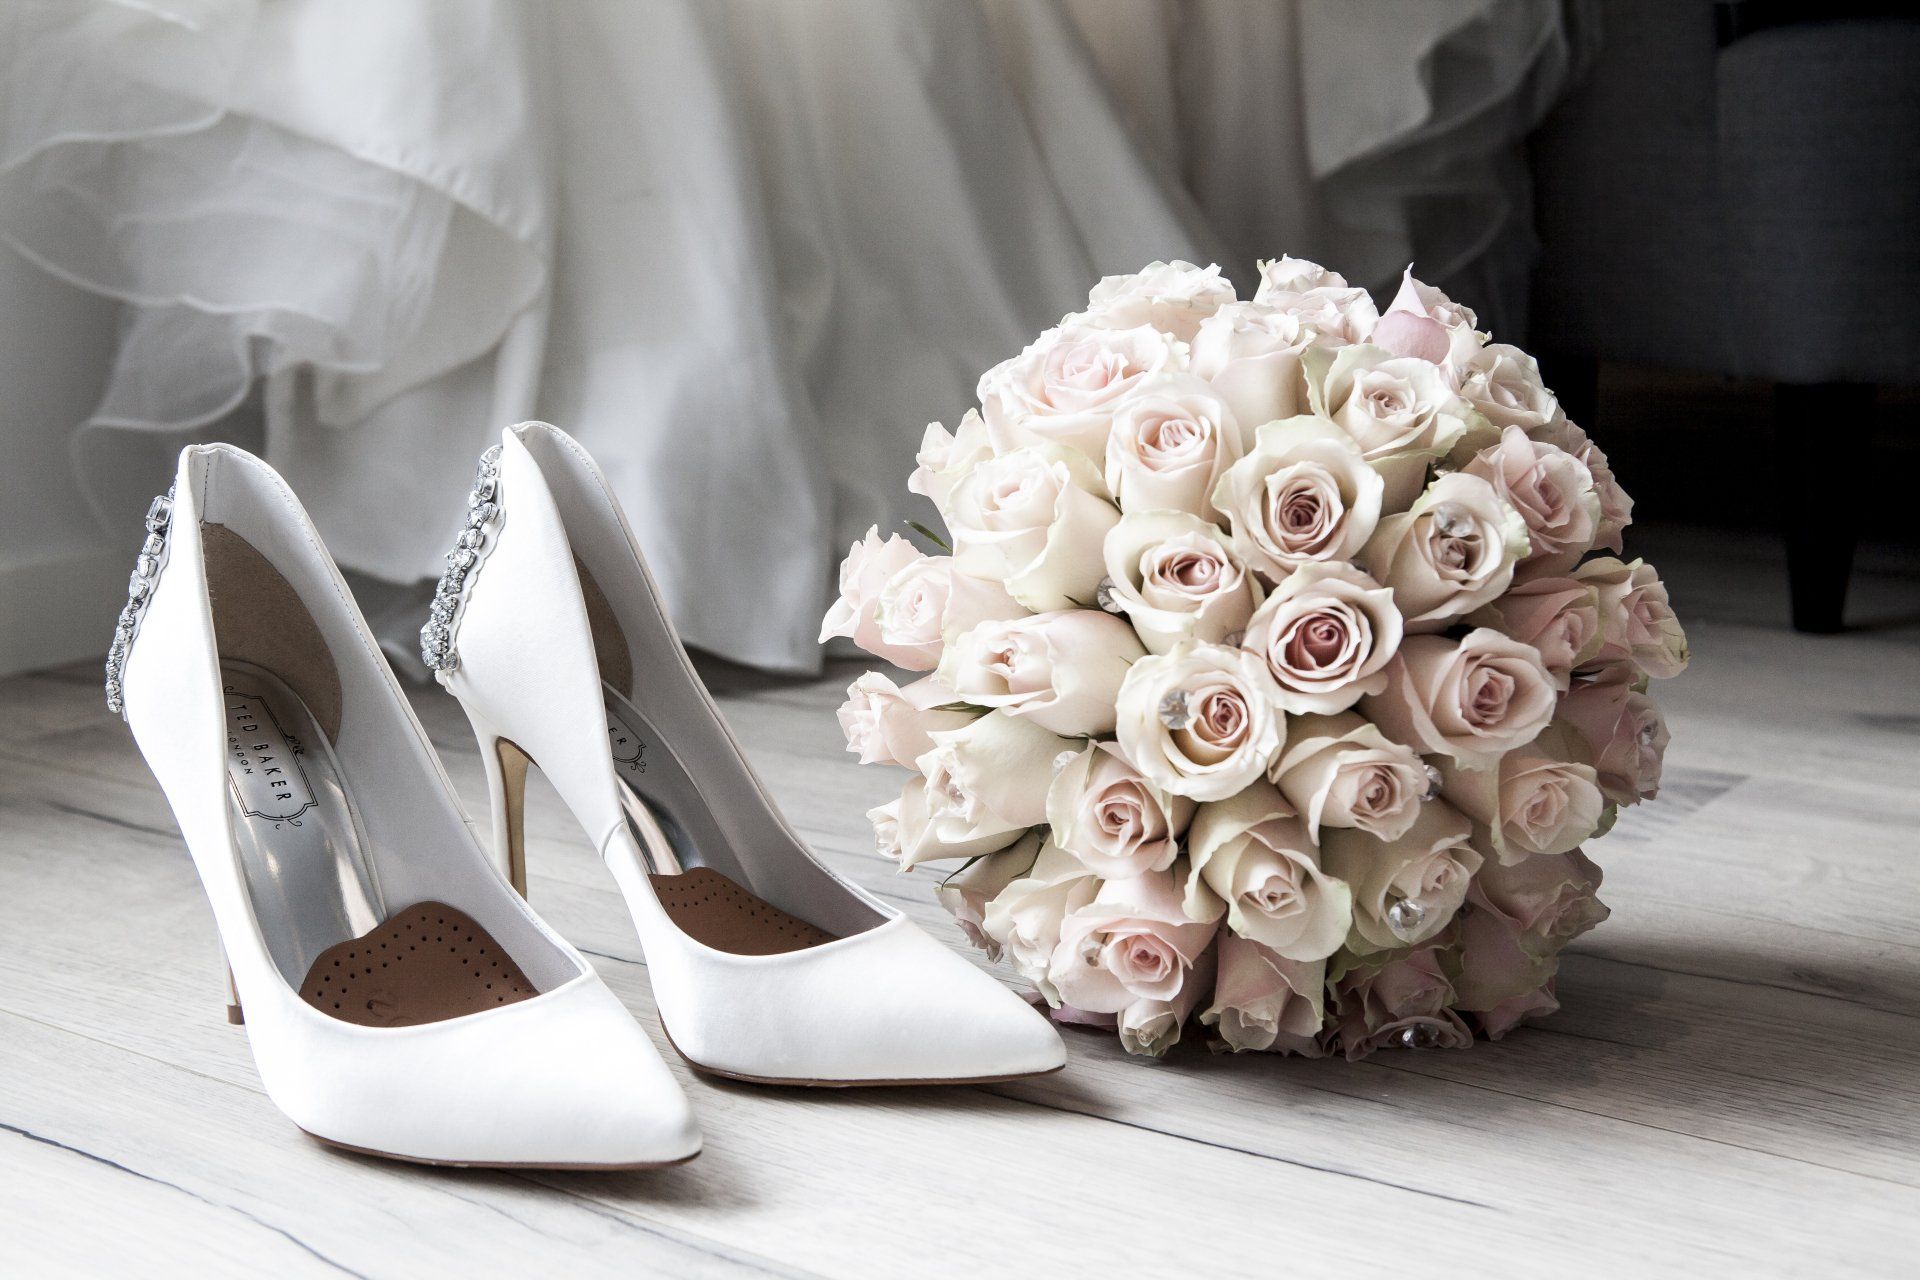 A bouquet of roses and a pair of wedding shoes on the floor.